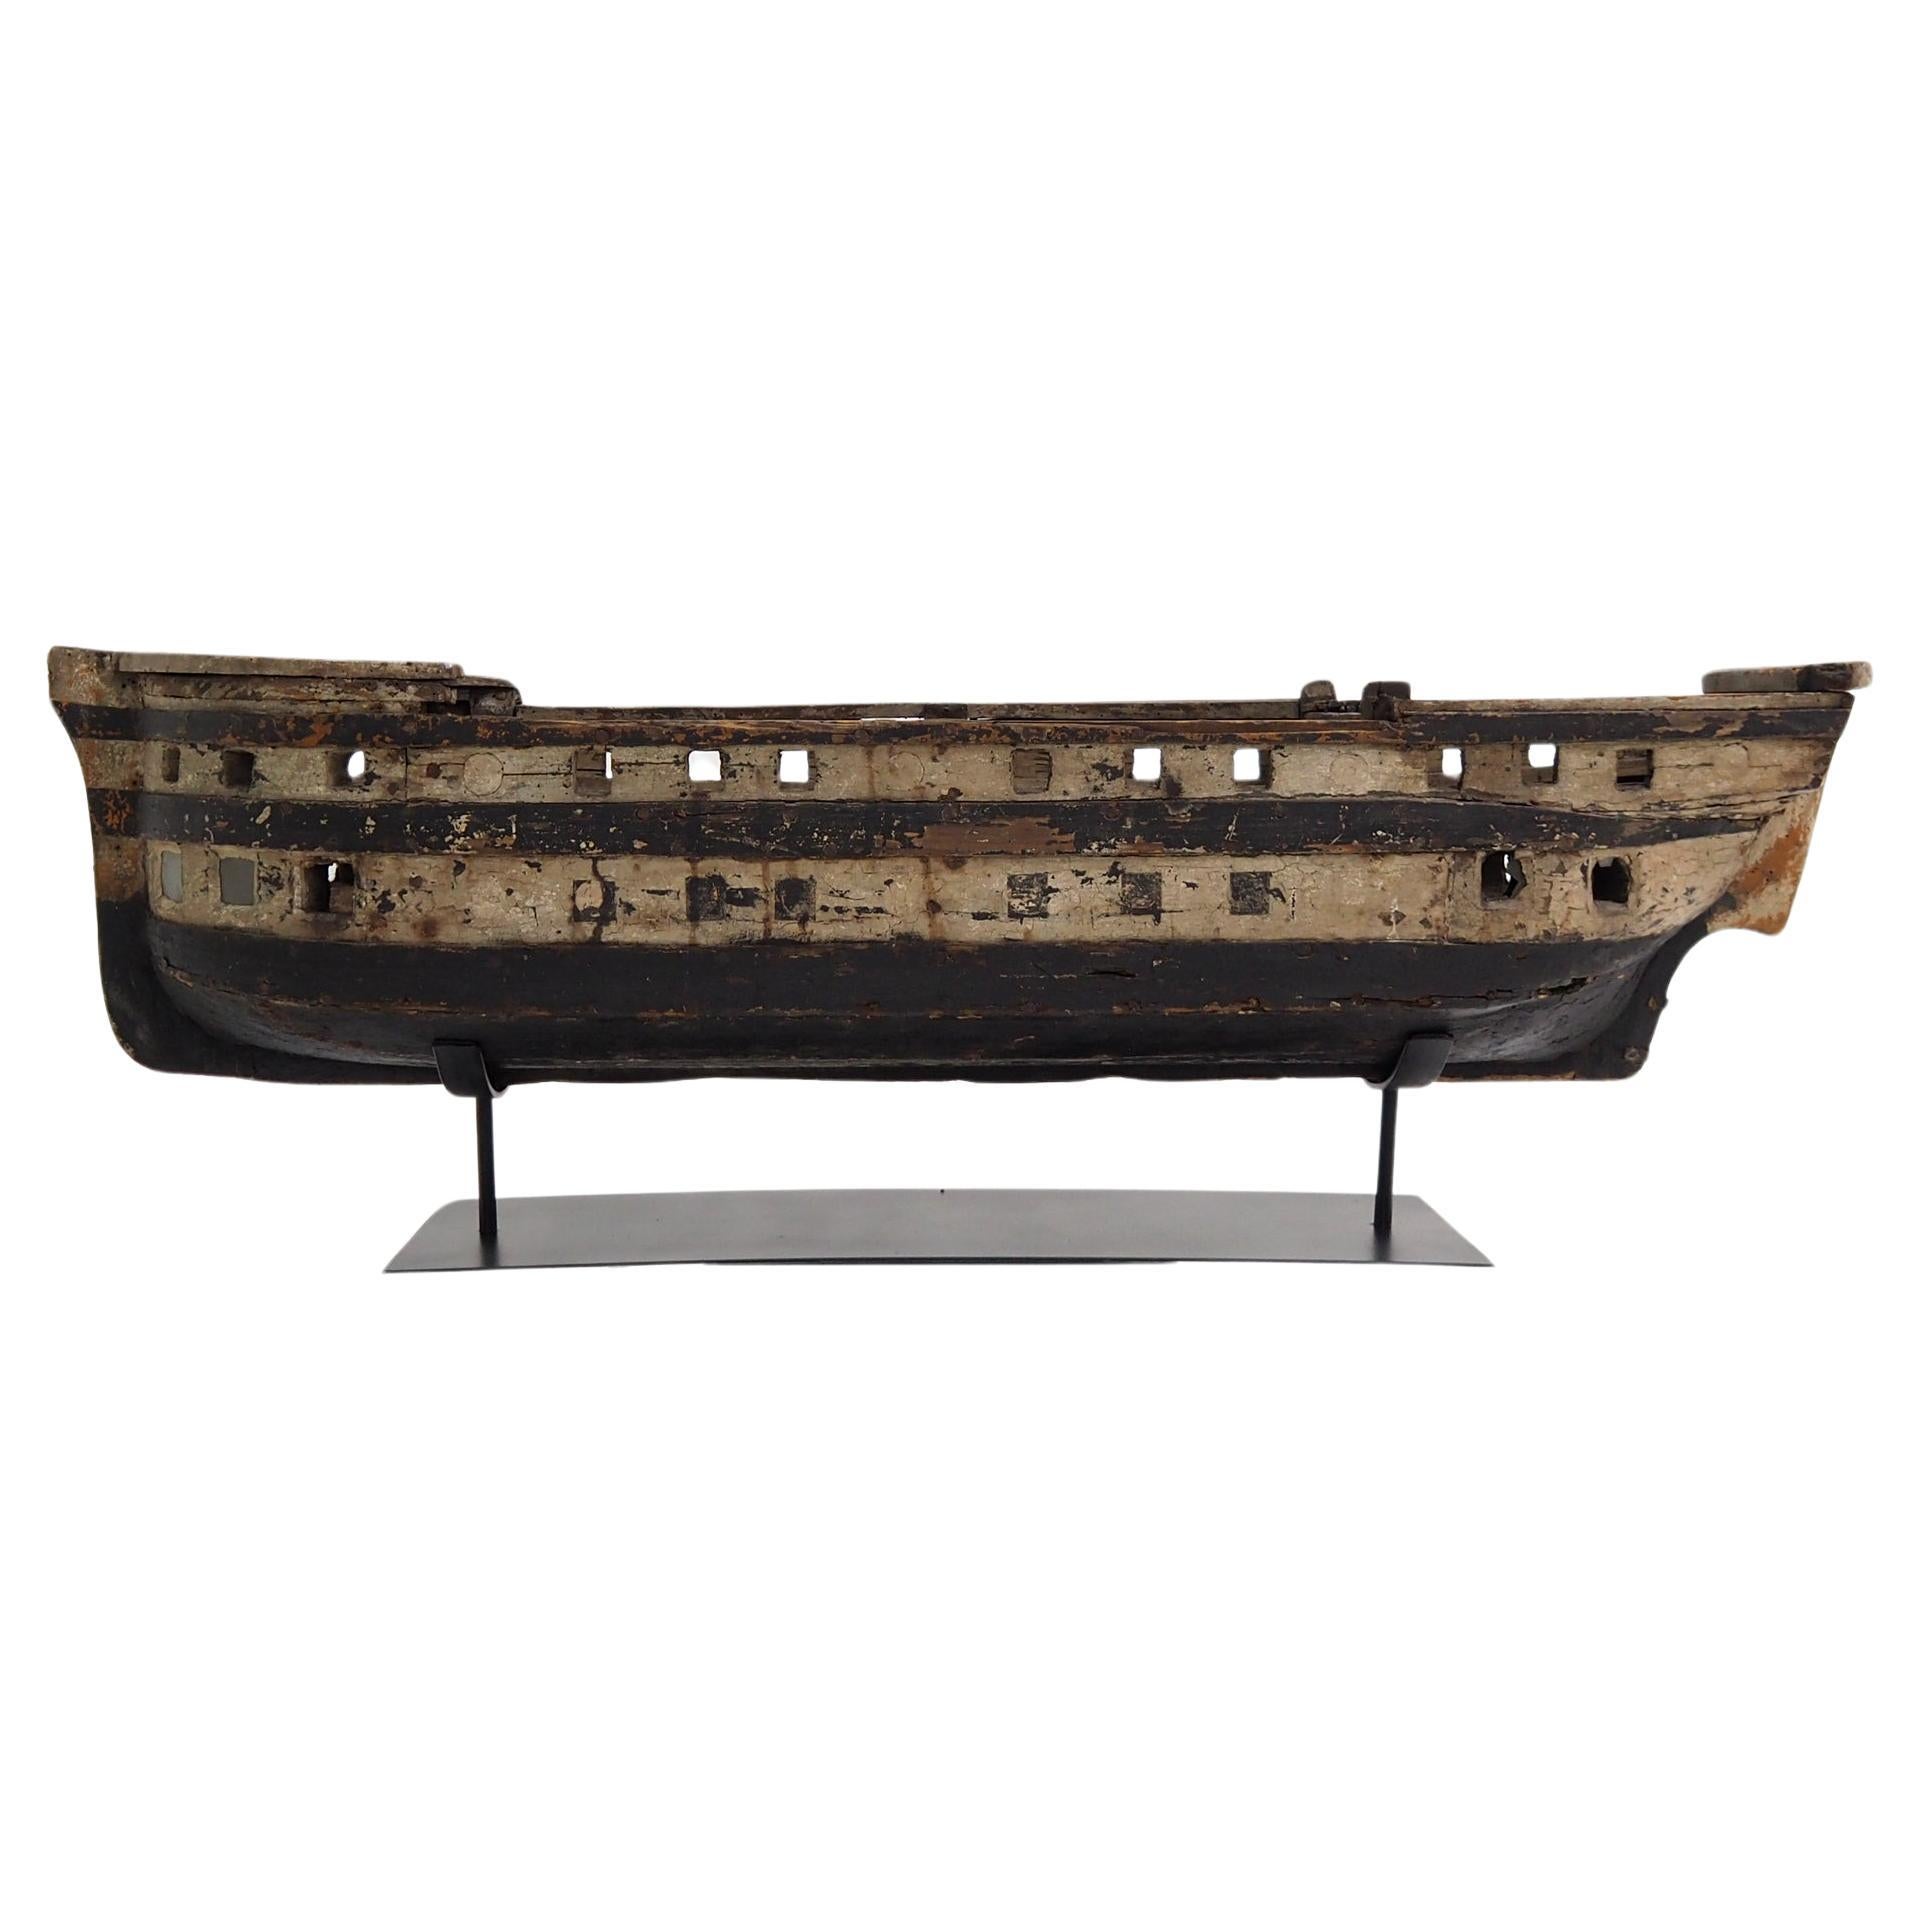 Very Decorative Antique Ship Model with Beautiful Wear and Tear